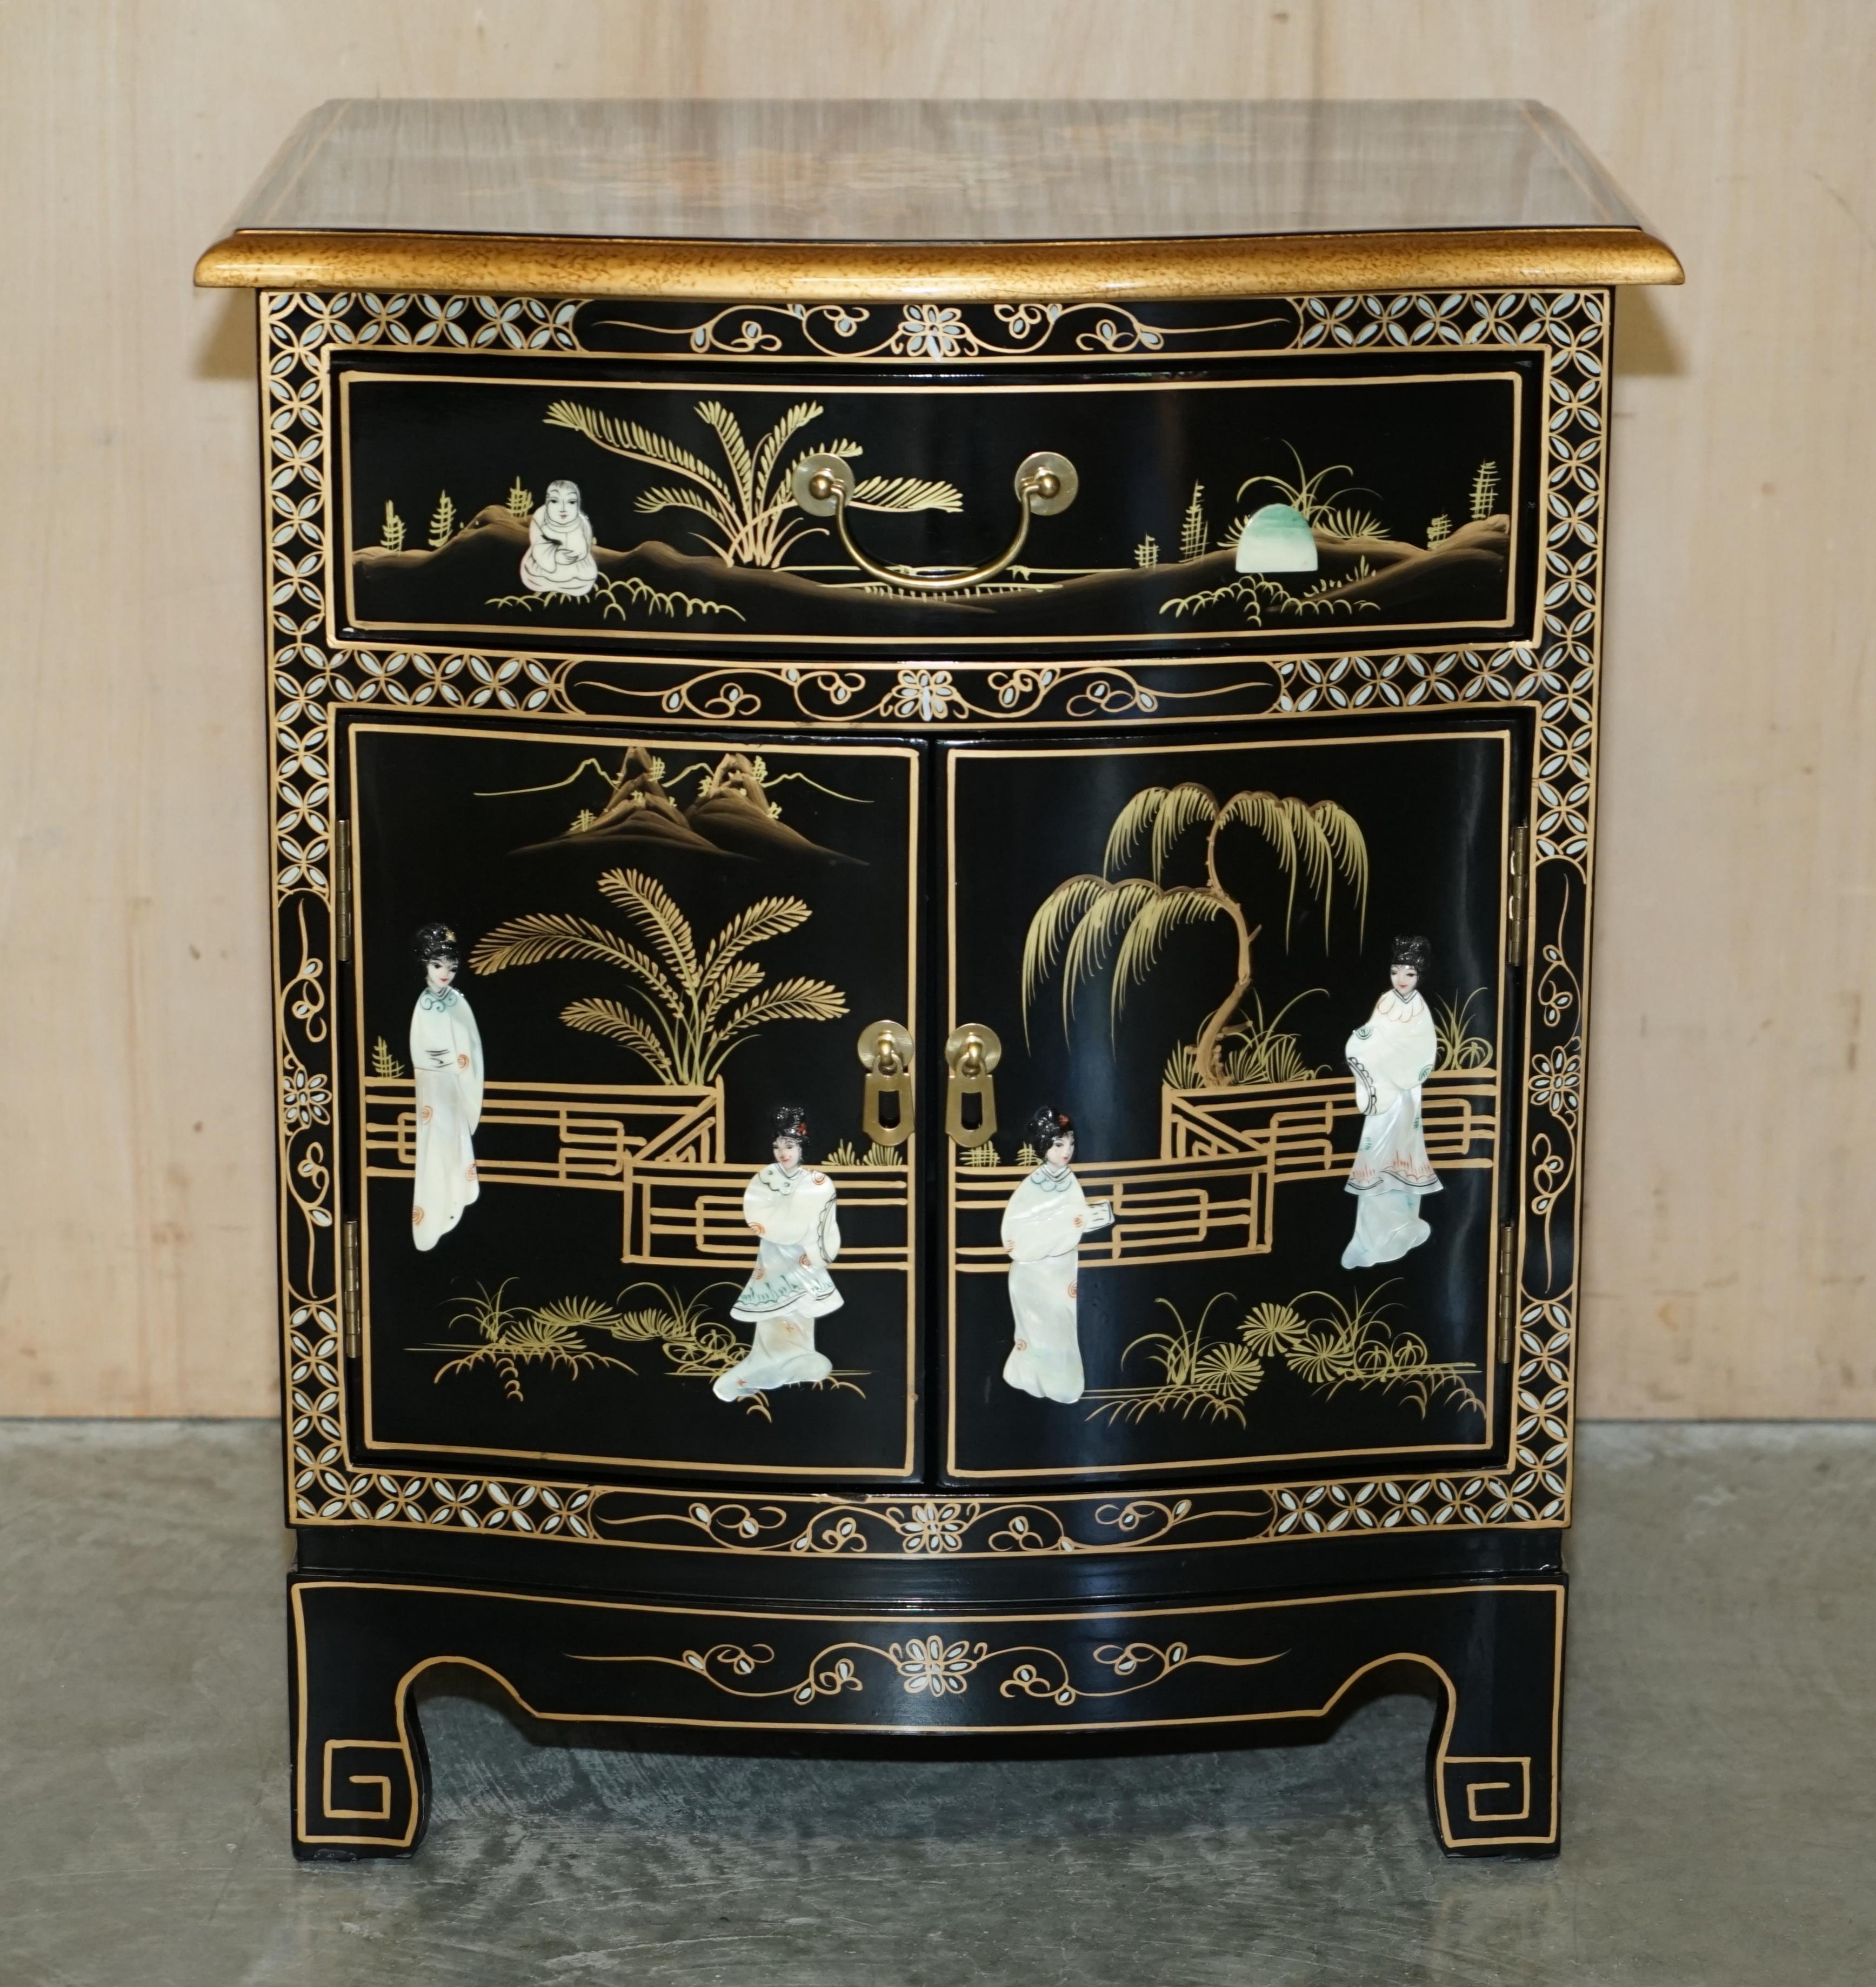 Chinoiseries CHINOISERIE DÉCORative GEISHA GIRLS LACQUER SiDE CABINET SOAPSTONE en vente